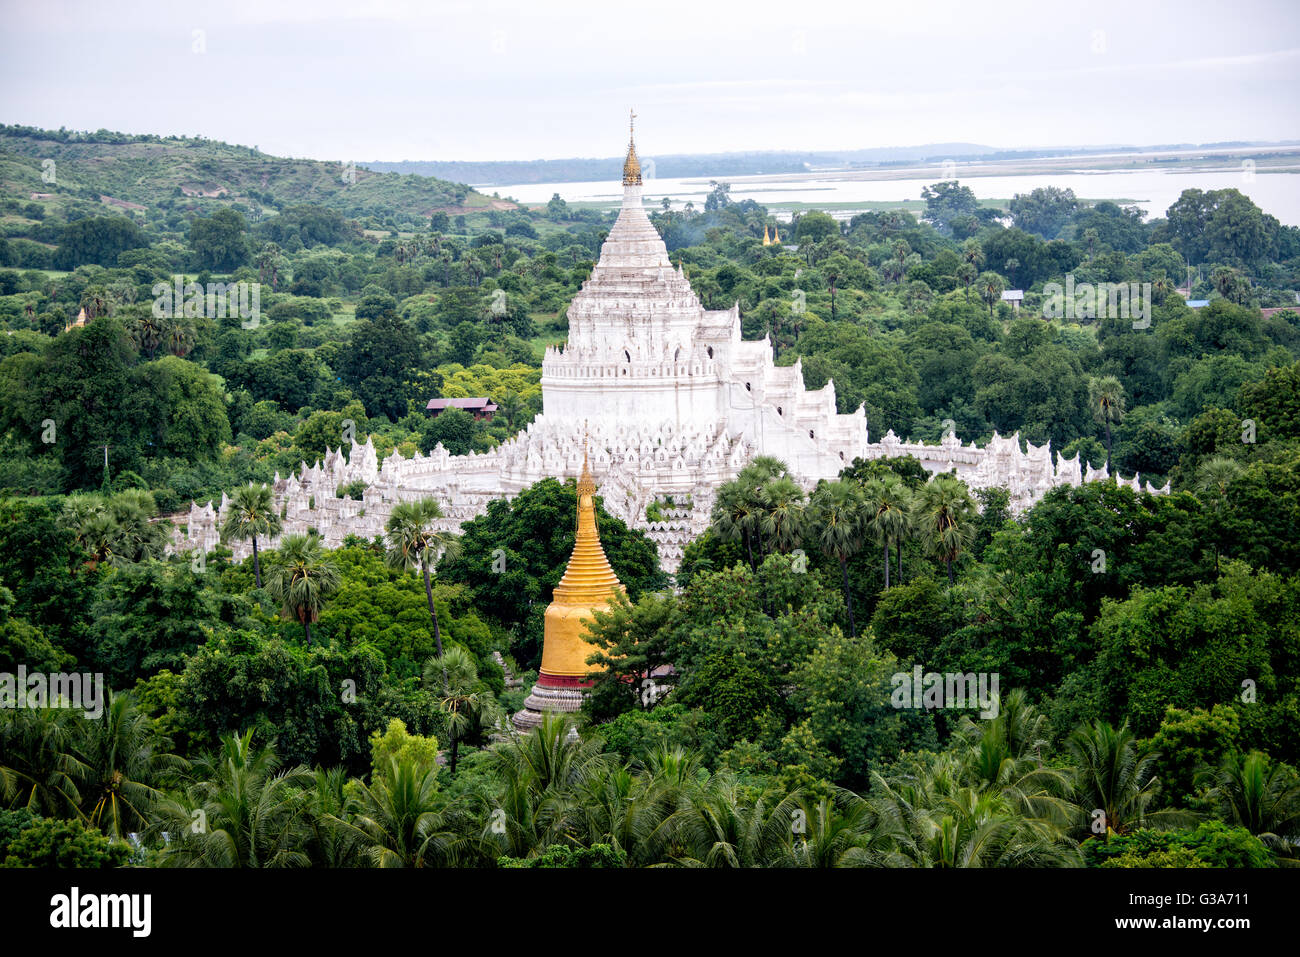 Built in 1816 and located in Mingun, not far from Mandalay, Hsinbyume Pagoda is designed in inspiration from Buddhist mythological mountain, Mount Meru. It features 7 levels of distinctive and unique whitewashed waves. Stock Photo